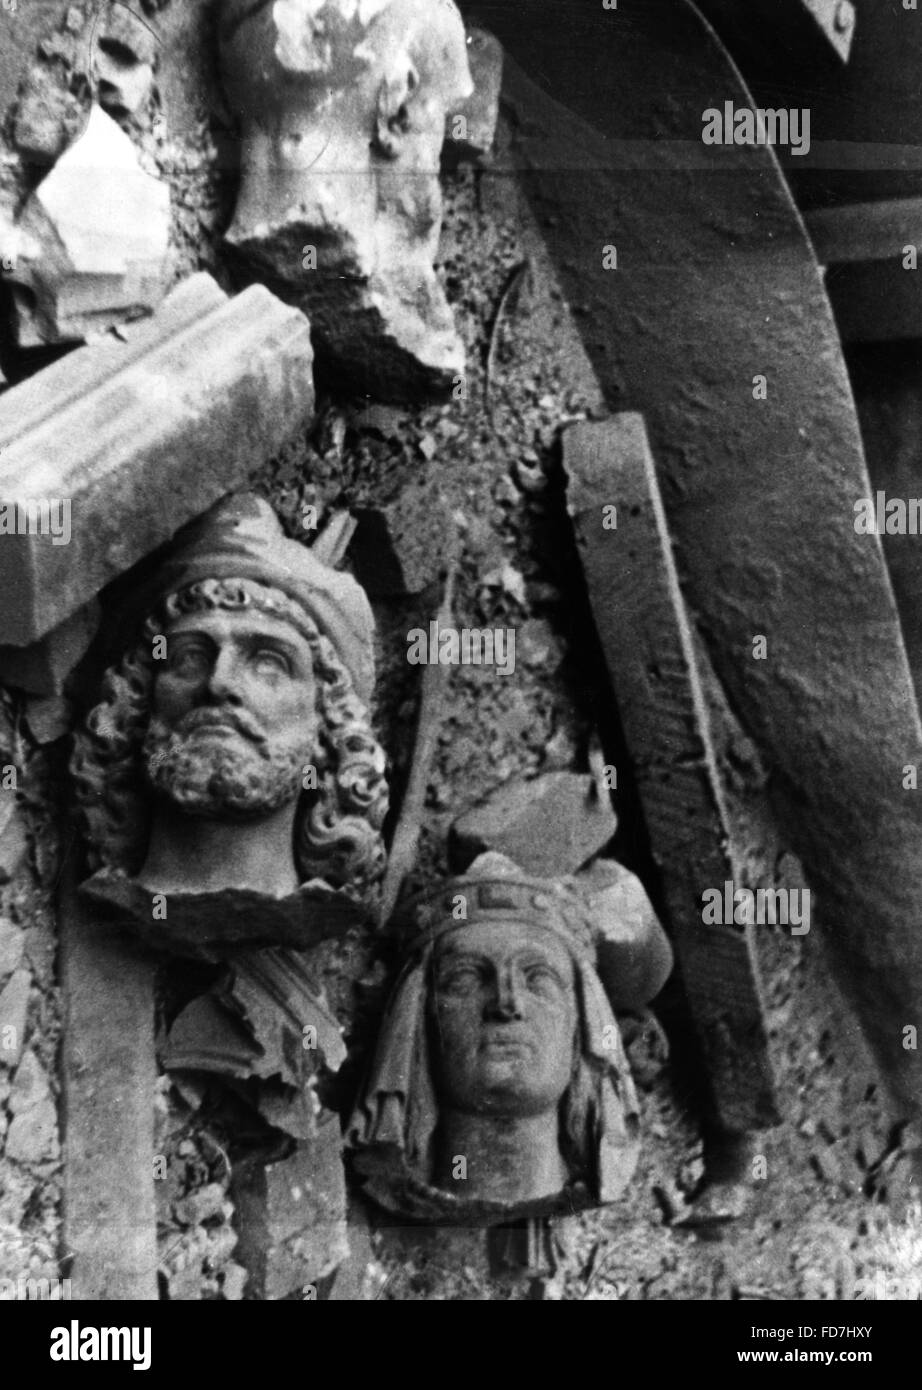 Ruined sculptures at the Cologne Cathedral, 1943 Stock Photo